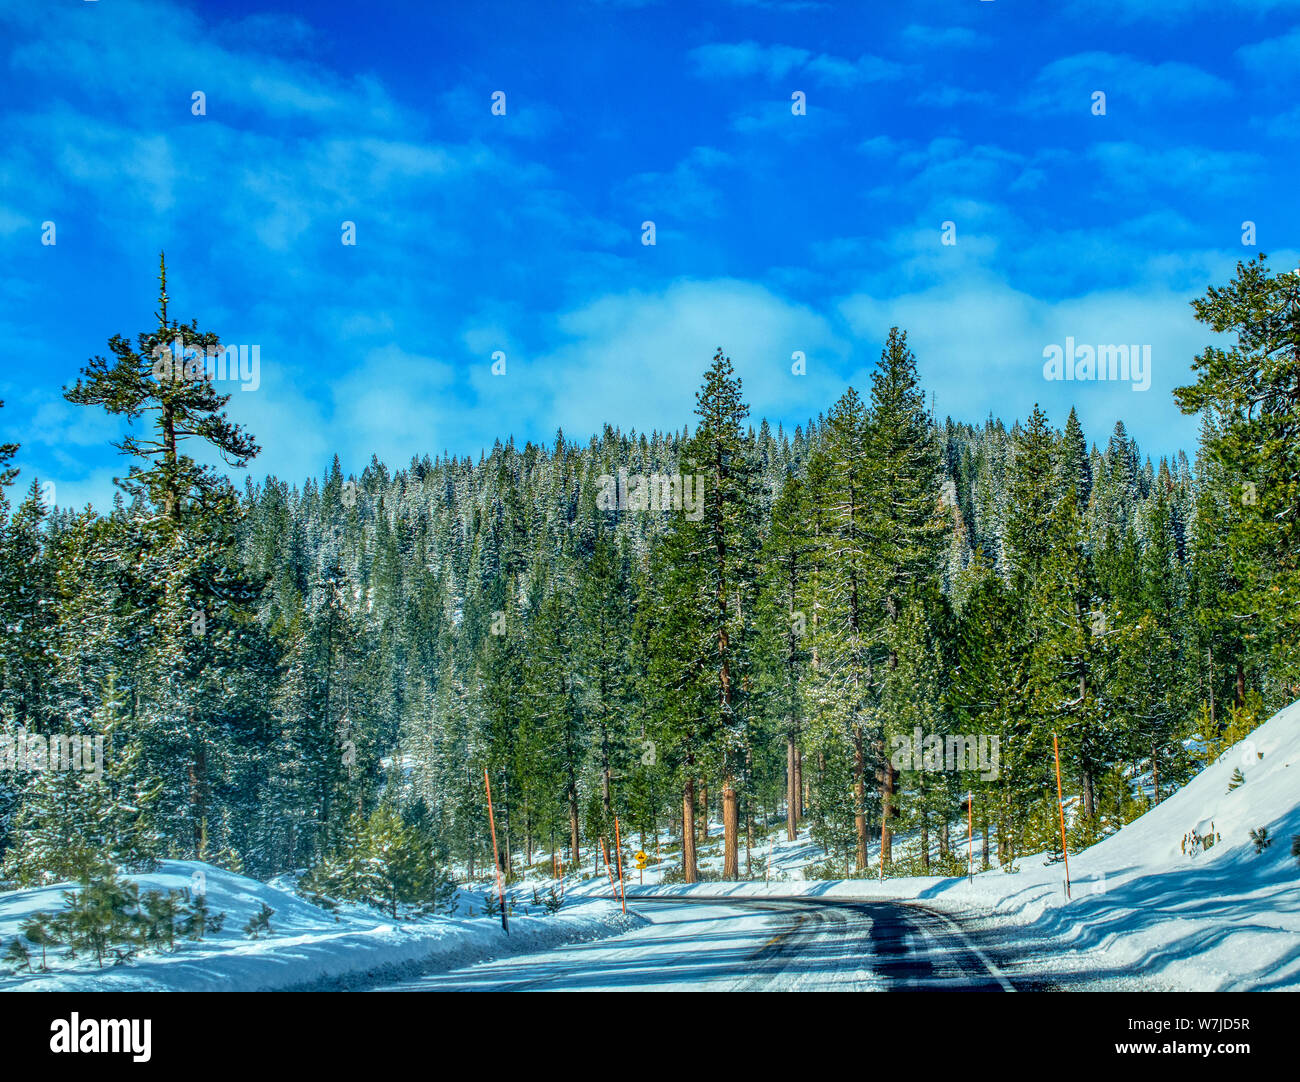 View of Snowy Evergreen Tree Lined Road to Mt. Bachelor Central Oregon Stock Photo